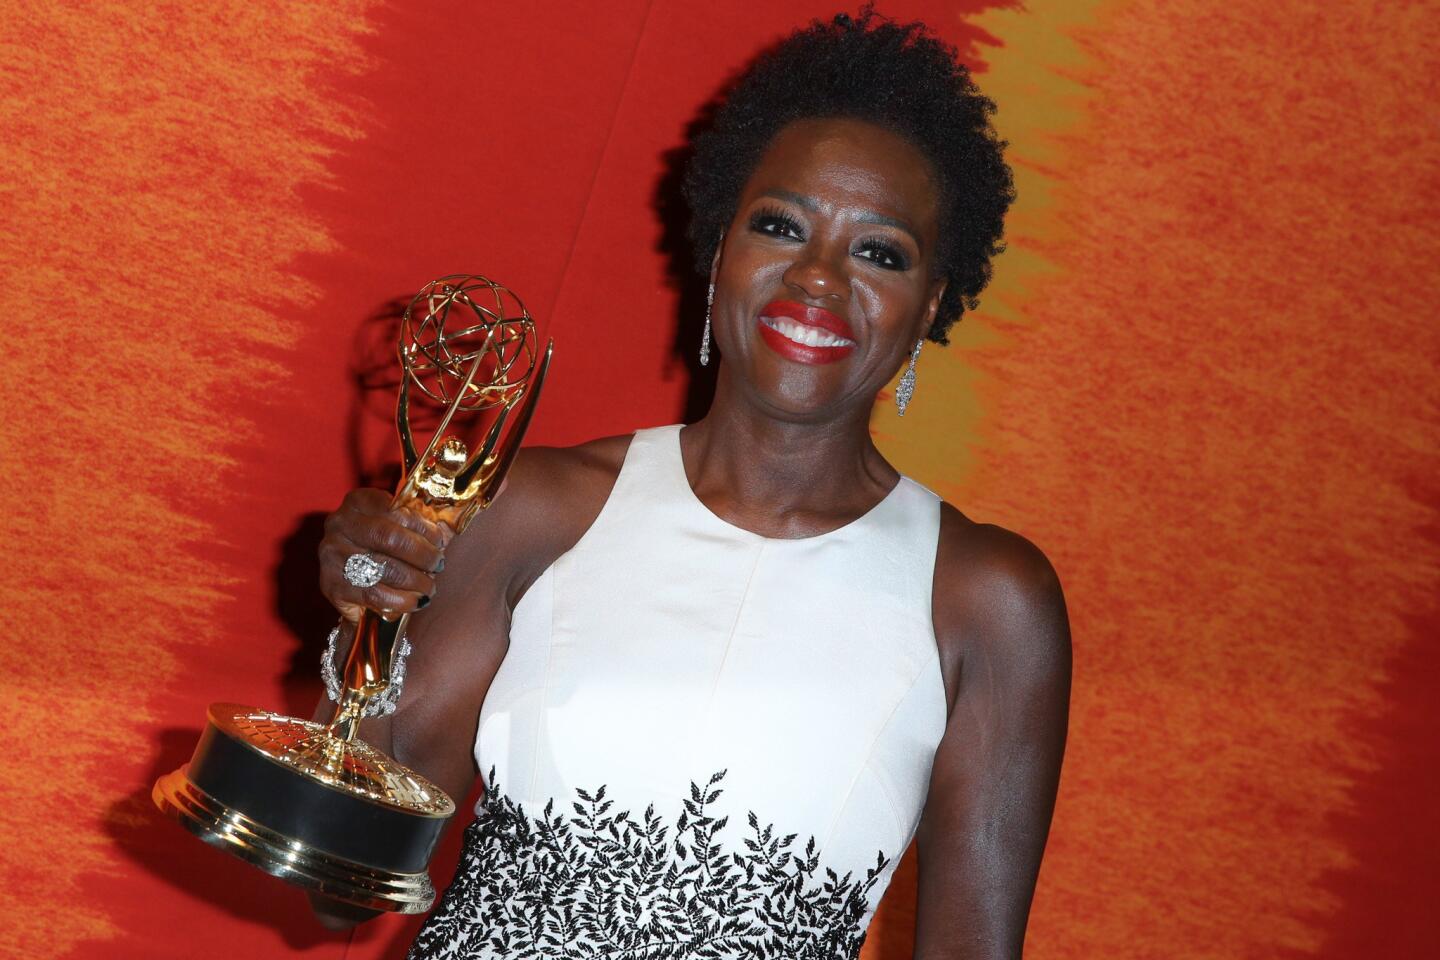 "How to Get Away With Murder" actress Viola Davis with her Emmy for lead actress in a drama.